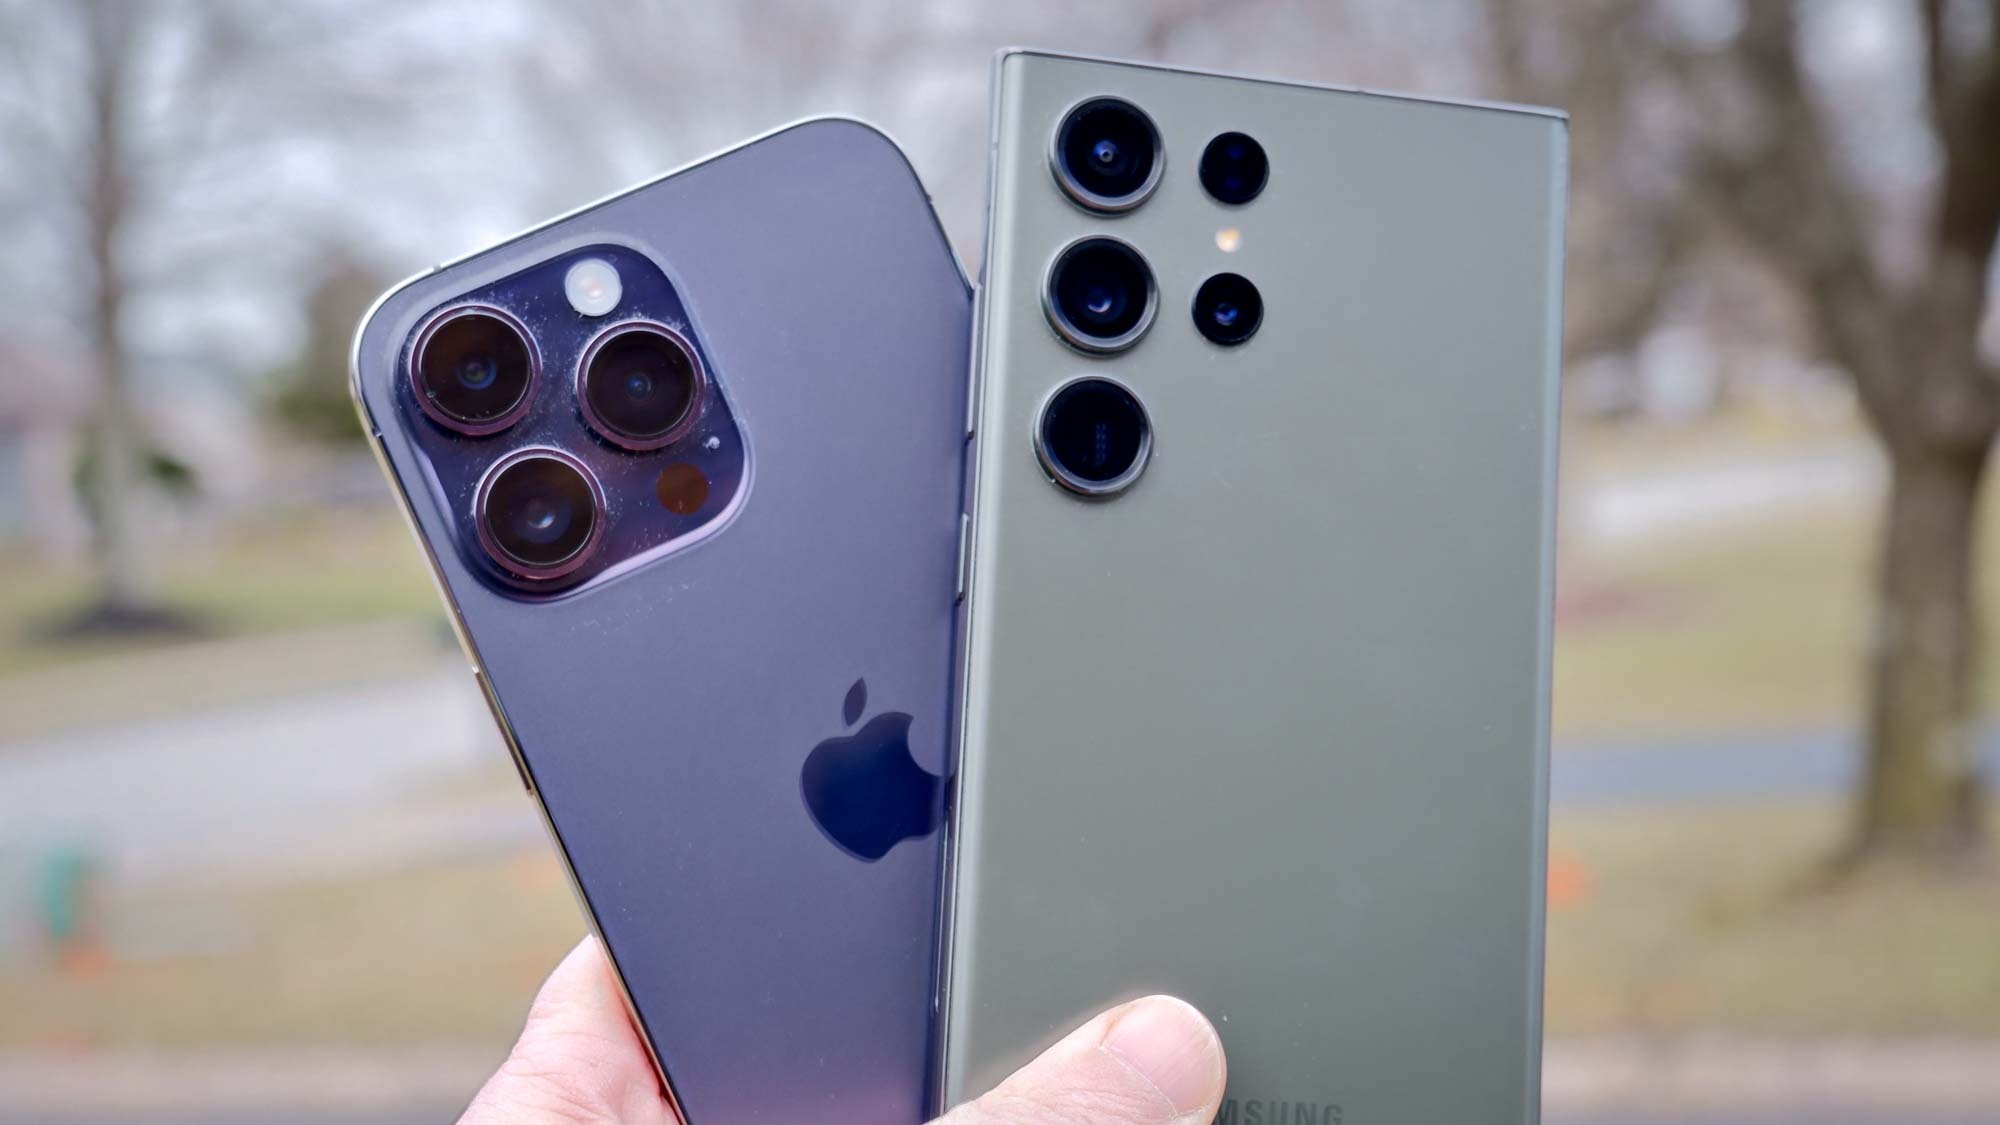 iPhone 14 Pro vs Samsung S23 Ultra: Cameras Compared - Amateur Photographer